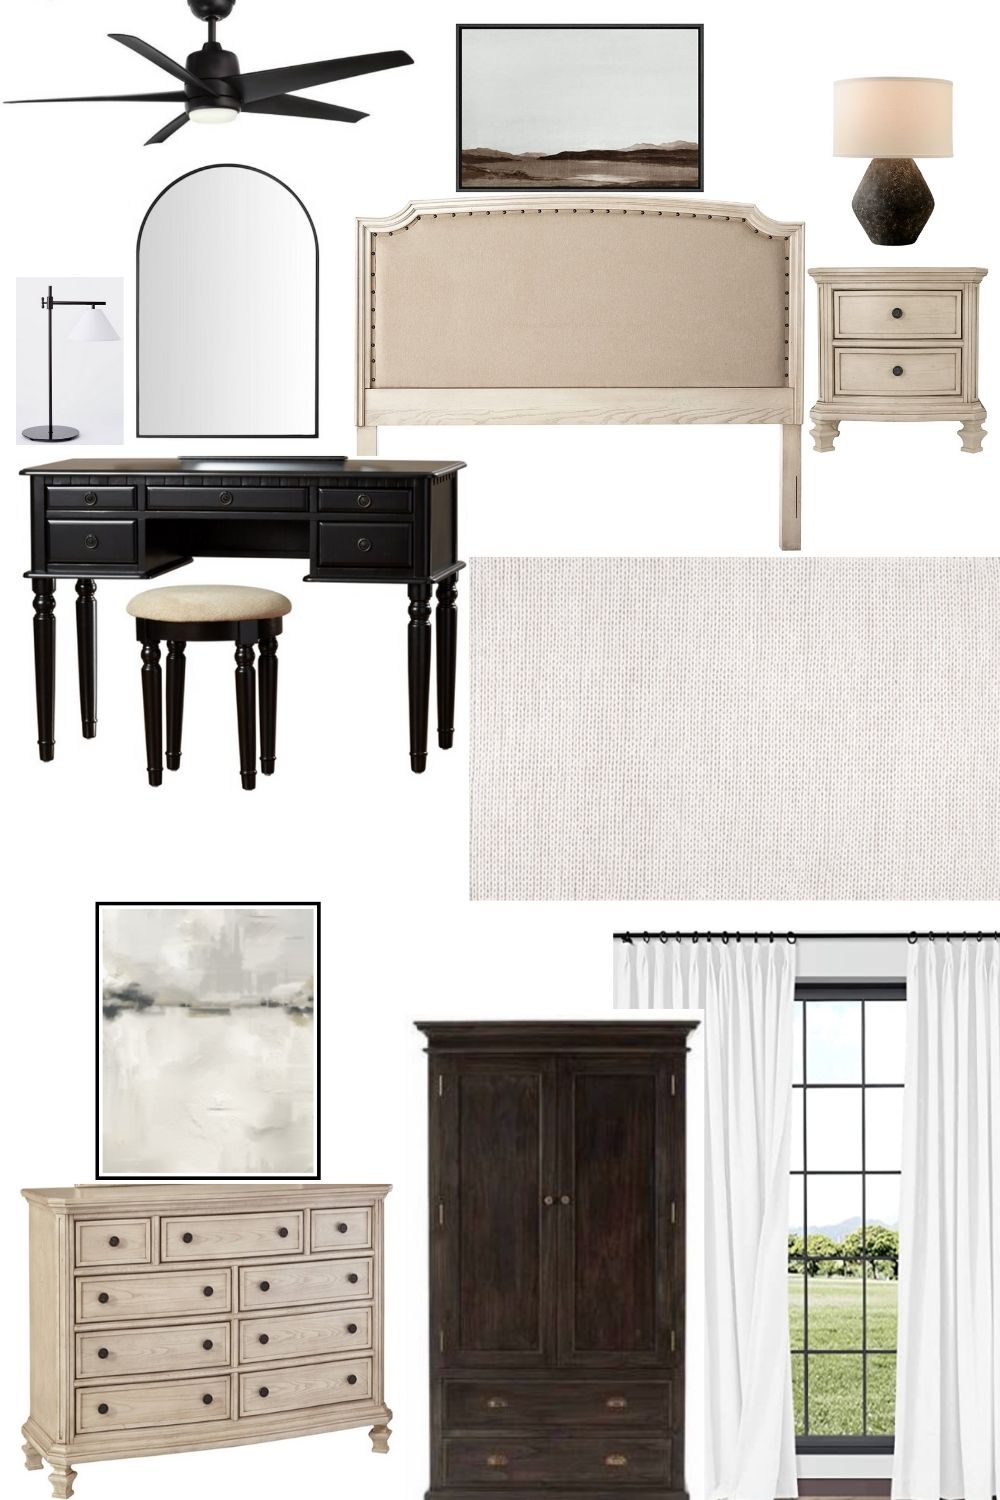 Mood board for a bedroom ideas: modern French country. Neutral and black bedroom ideas #bedroomideasmodern